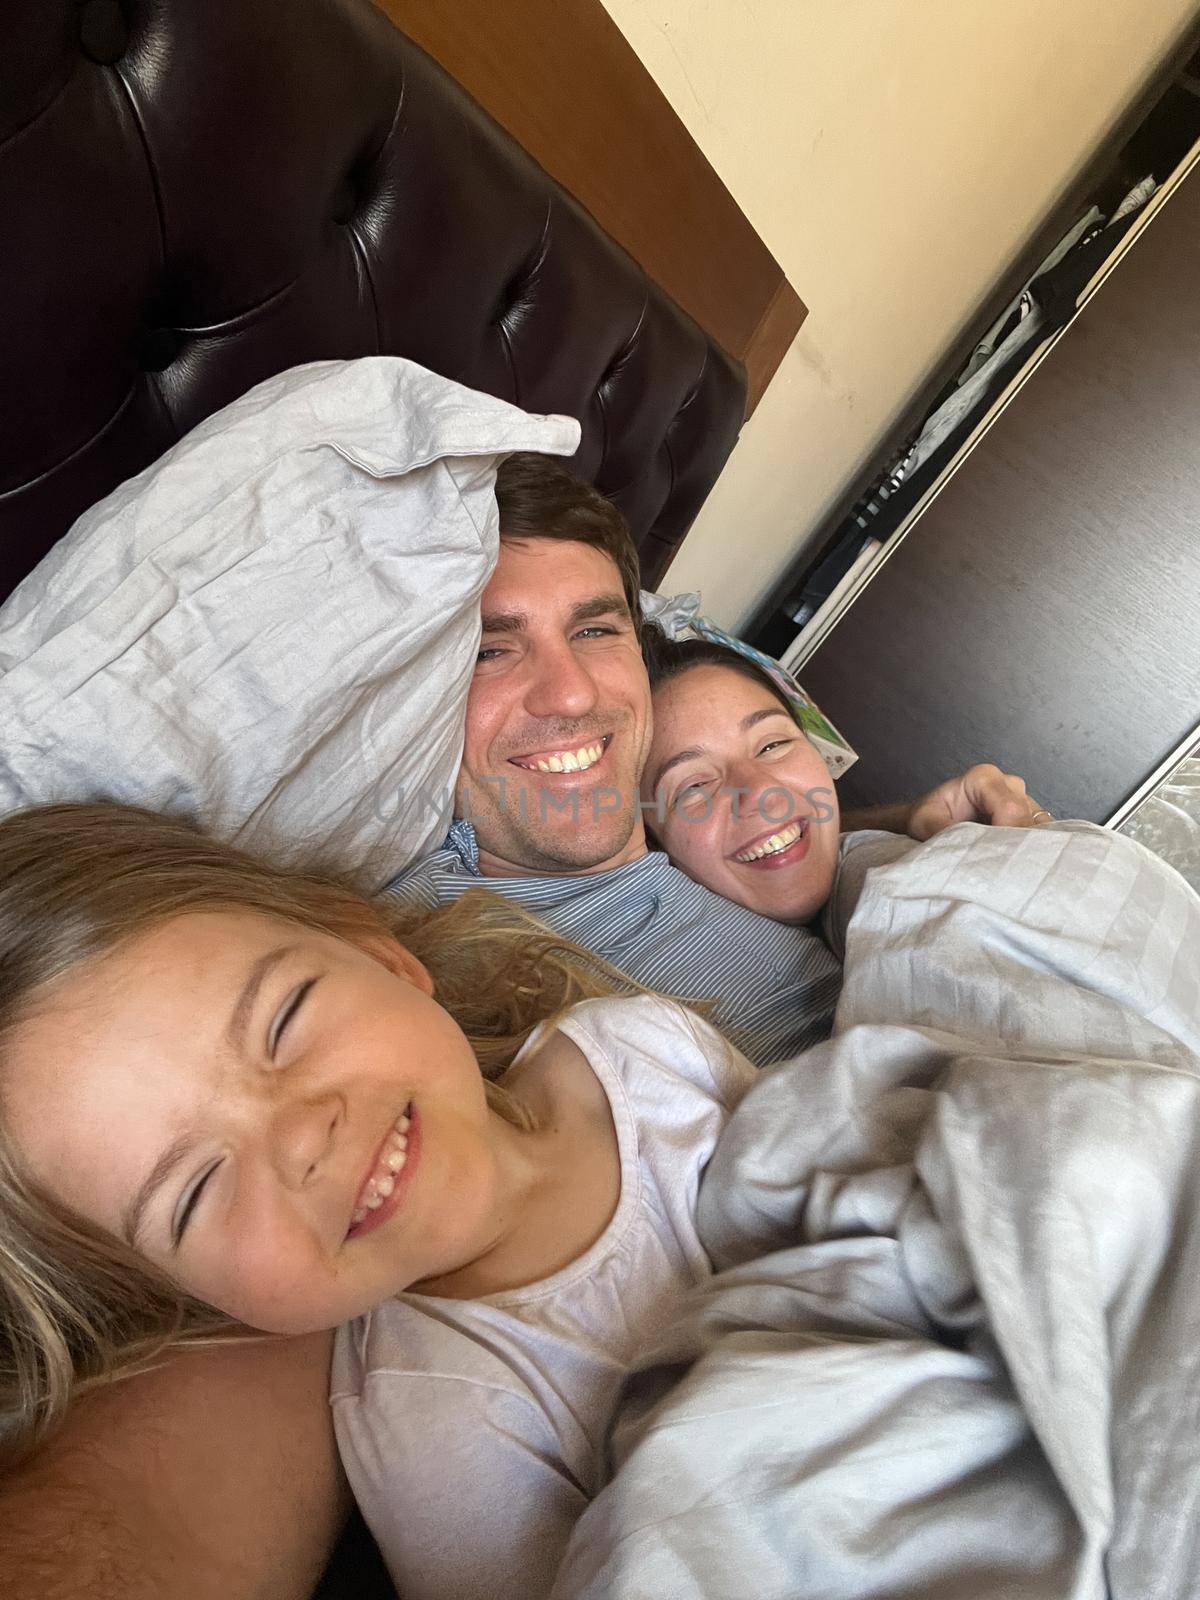 Smiling mom, dad and little girl lying in bed by Nadtochiy